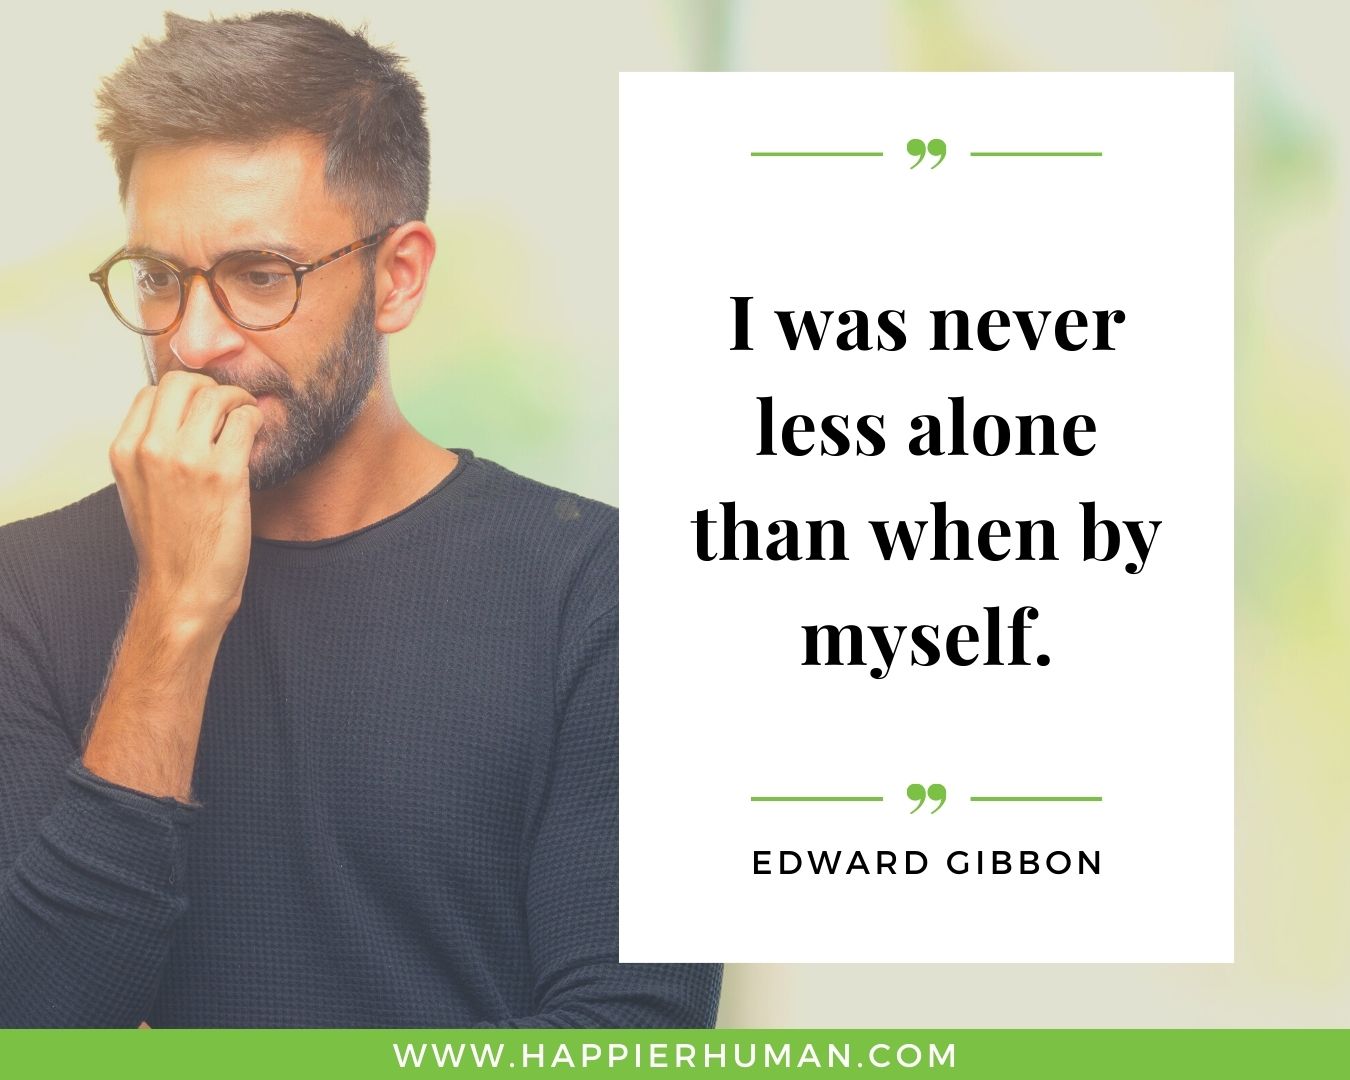 Introvert Quotes - “I was never less alone than when by myself.” – Edward Gibbon